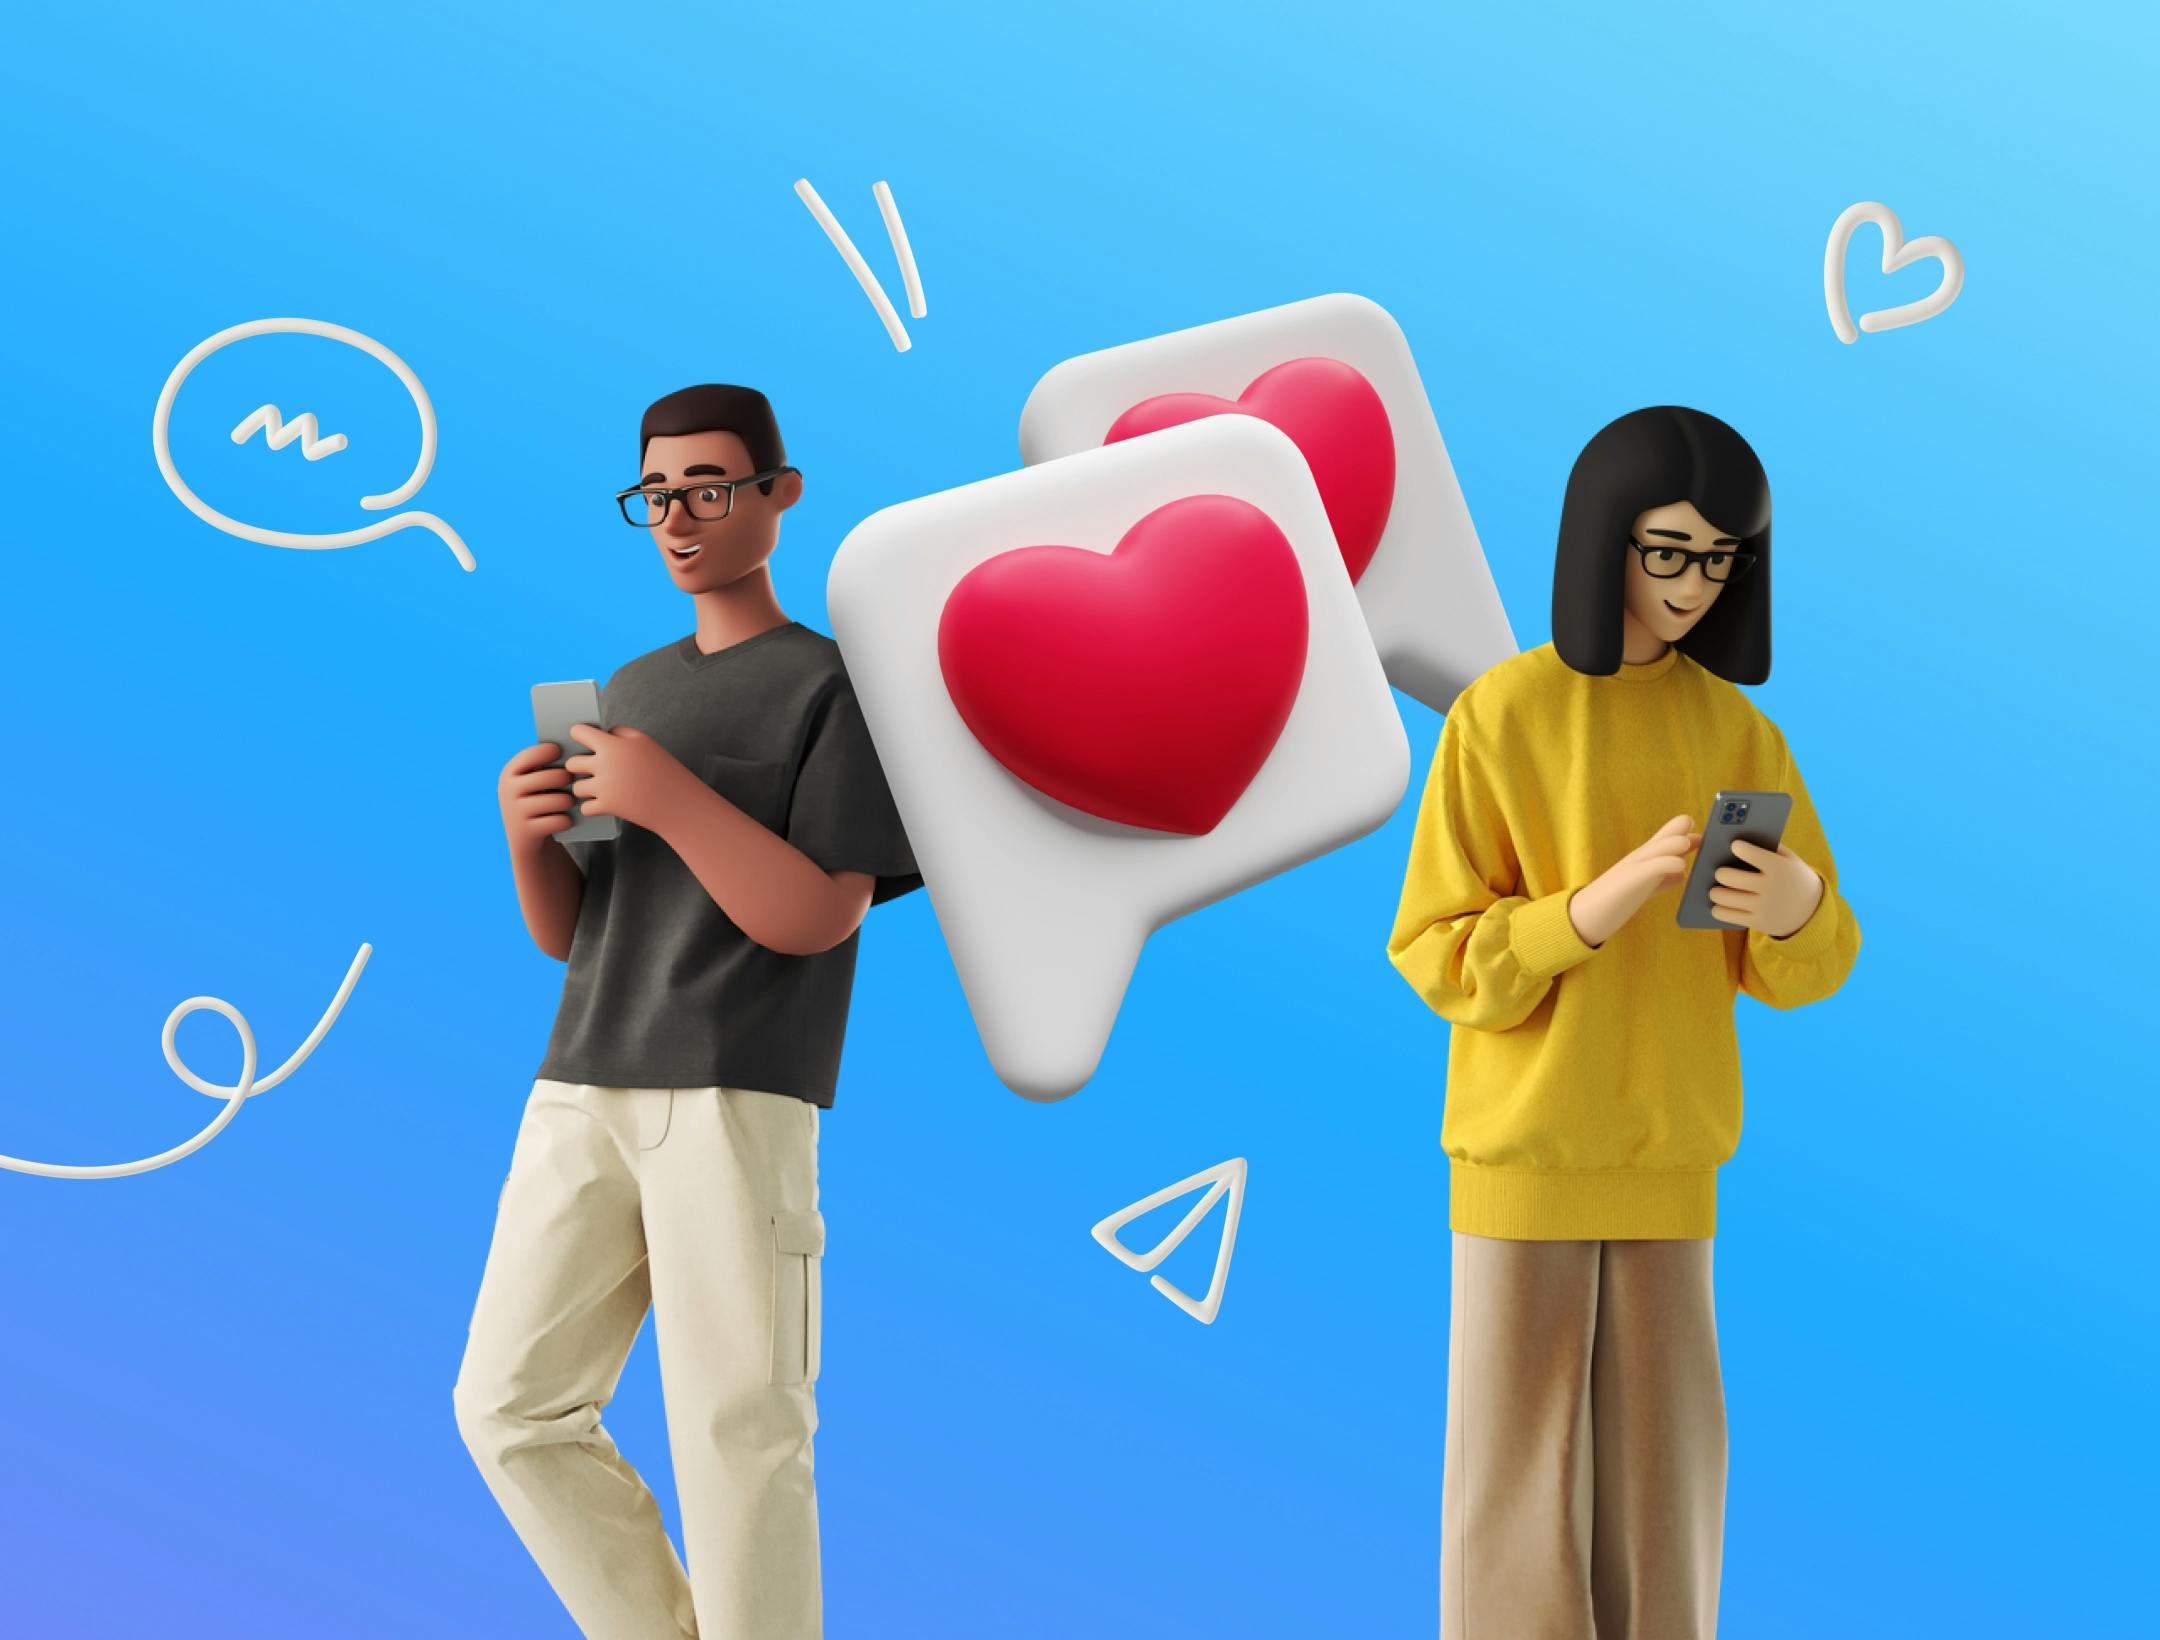 Thow to make an app like tinder: article cover